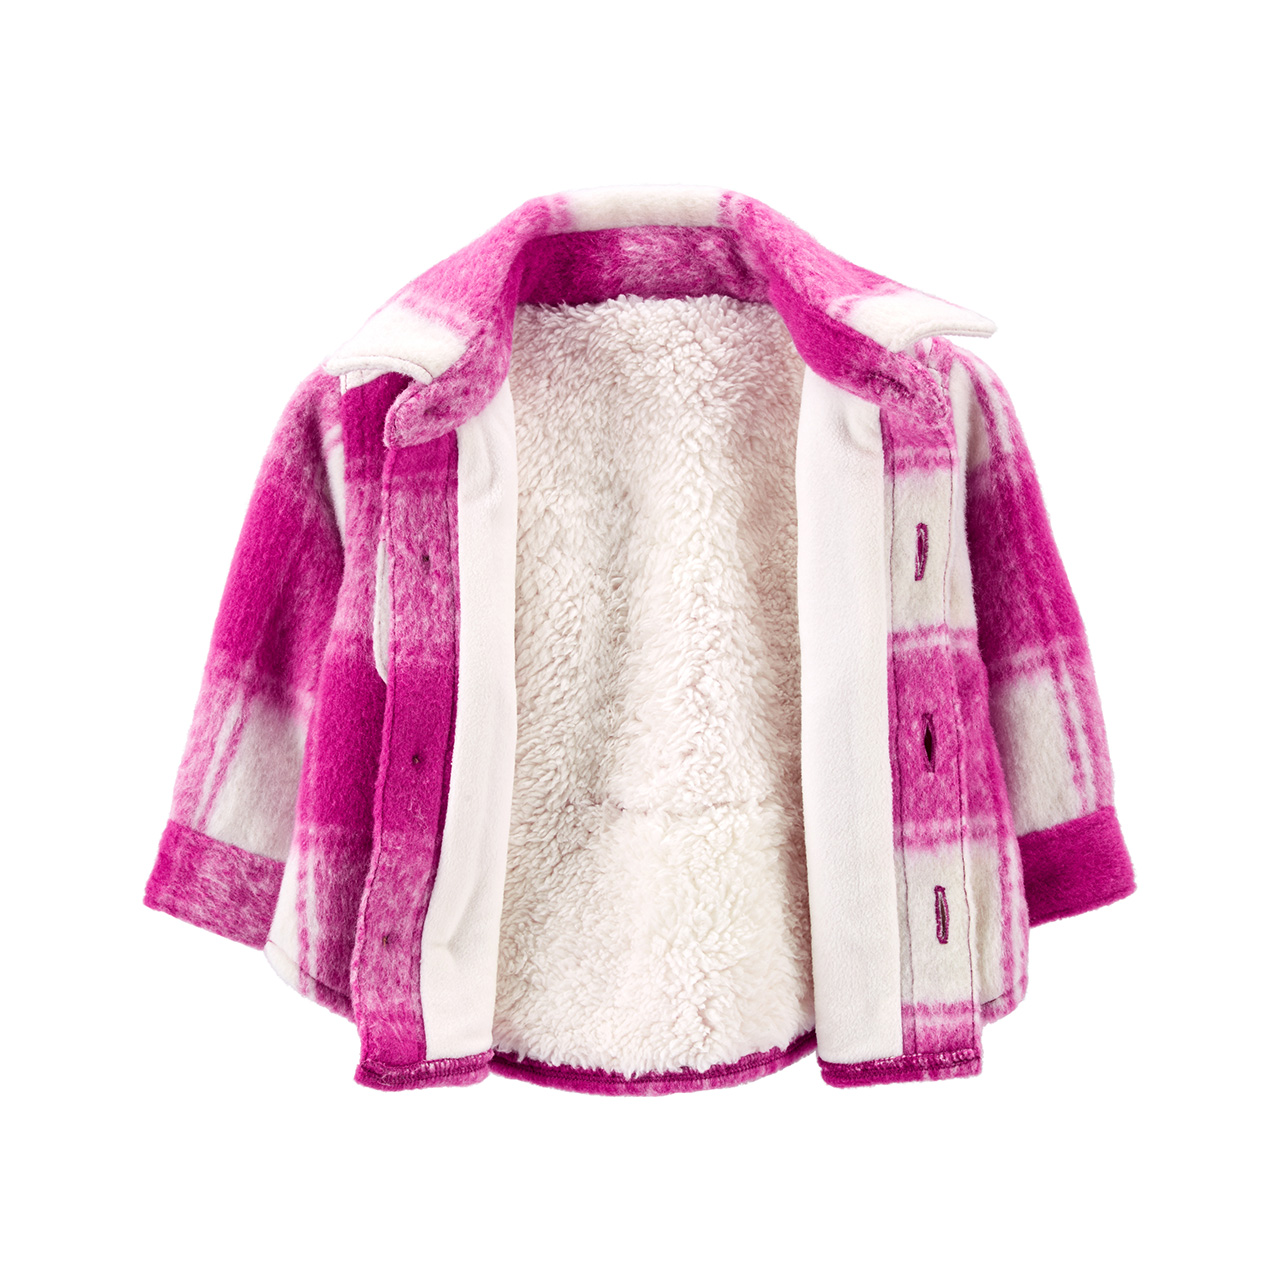 A pink and white shacket for babies.